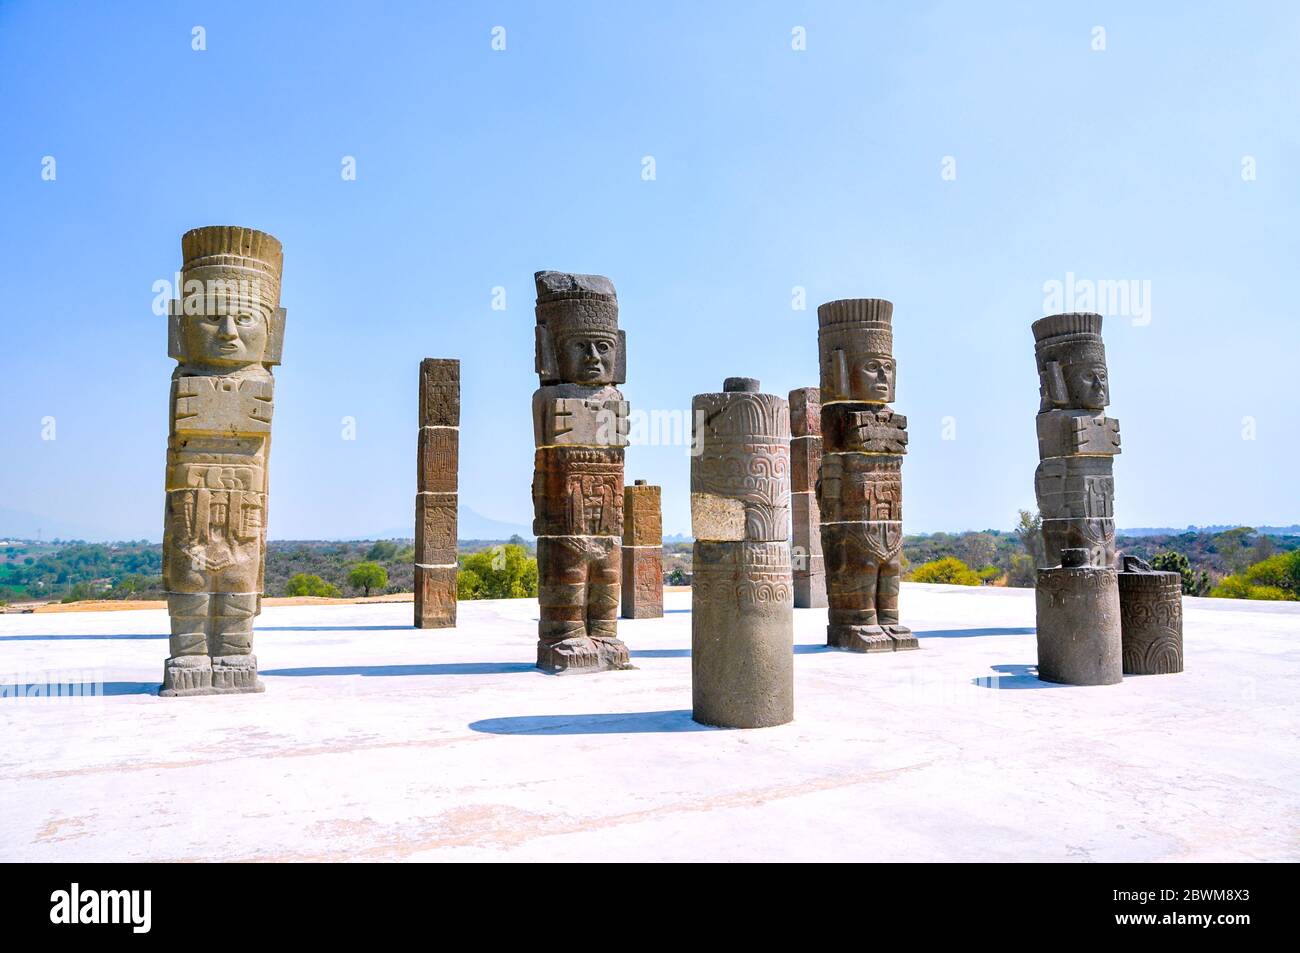 Tula, Mexico. View of Pyramid of Quetzalcoatl with Toltec Warriors columns in ceremonial site called Tula Grande, Mexico Stock Photo